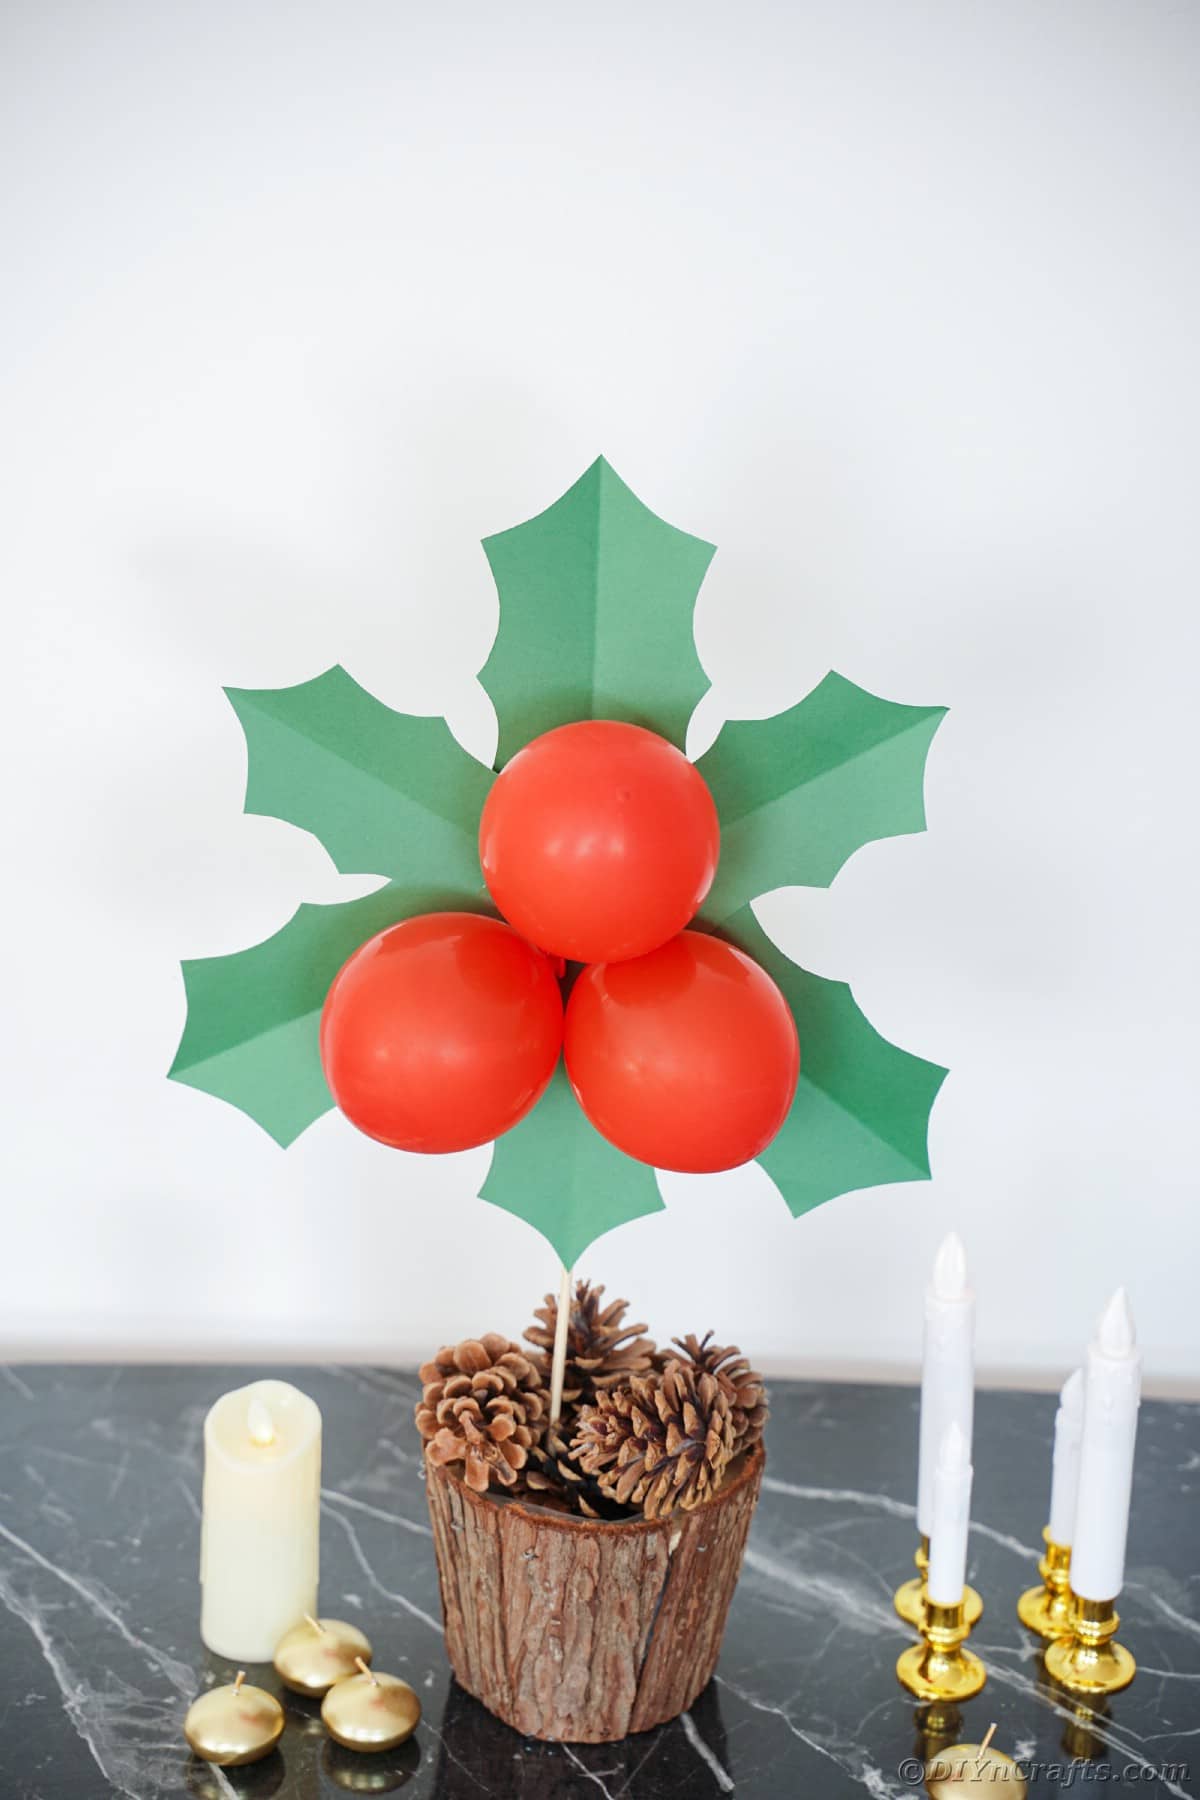 giant holly and berry decoration in bucket with pinecones